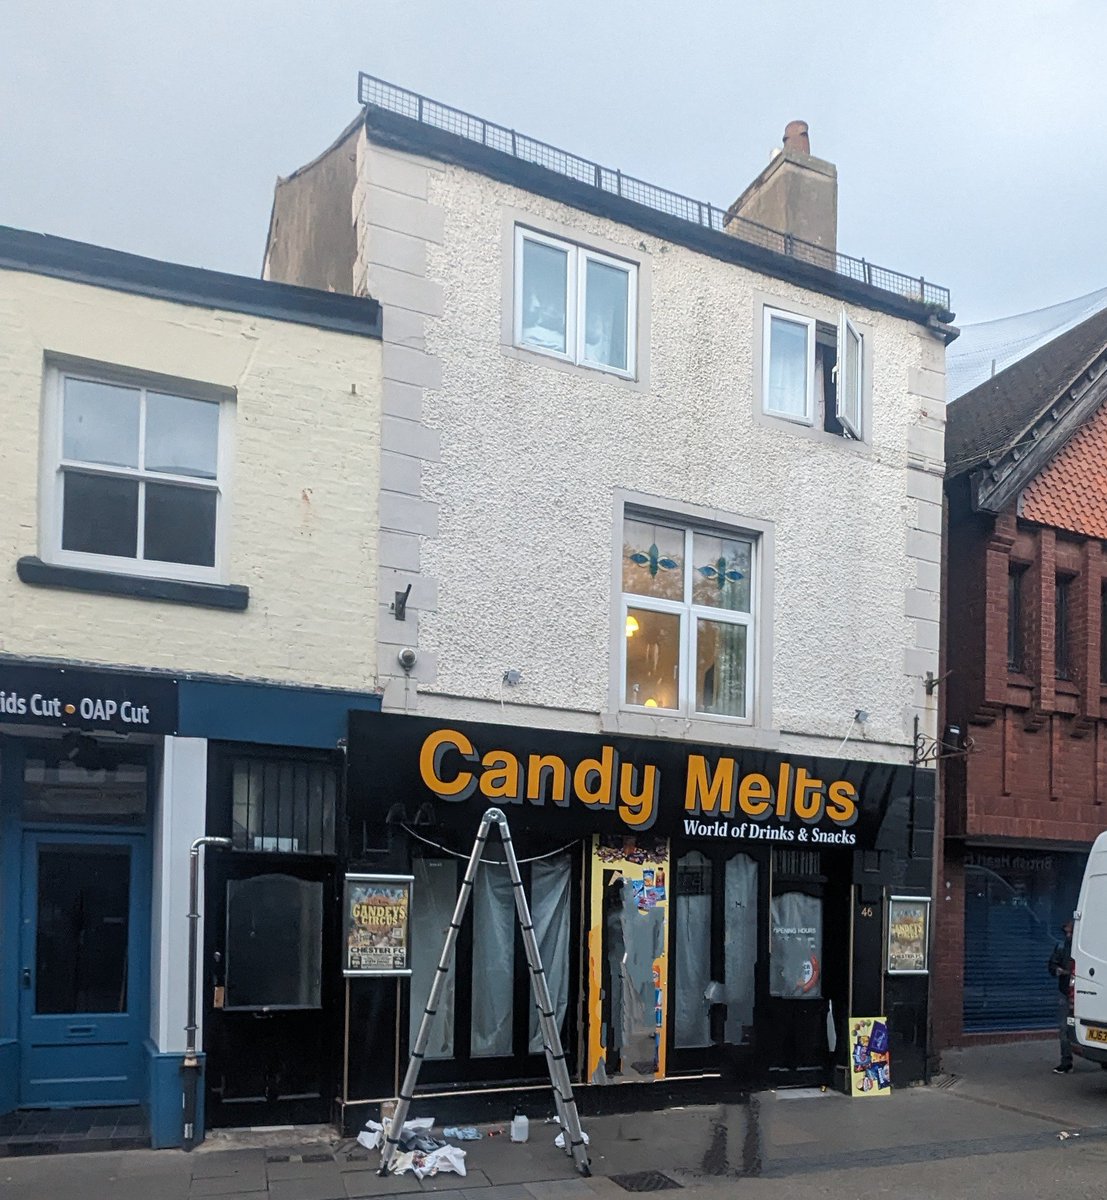 Frodsham street gets a candy Melt store at last